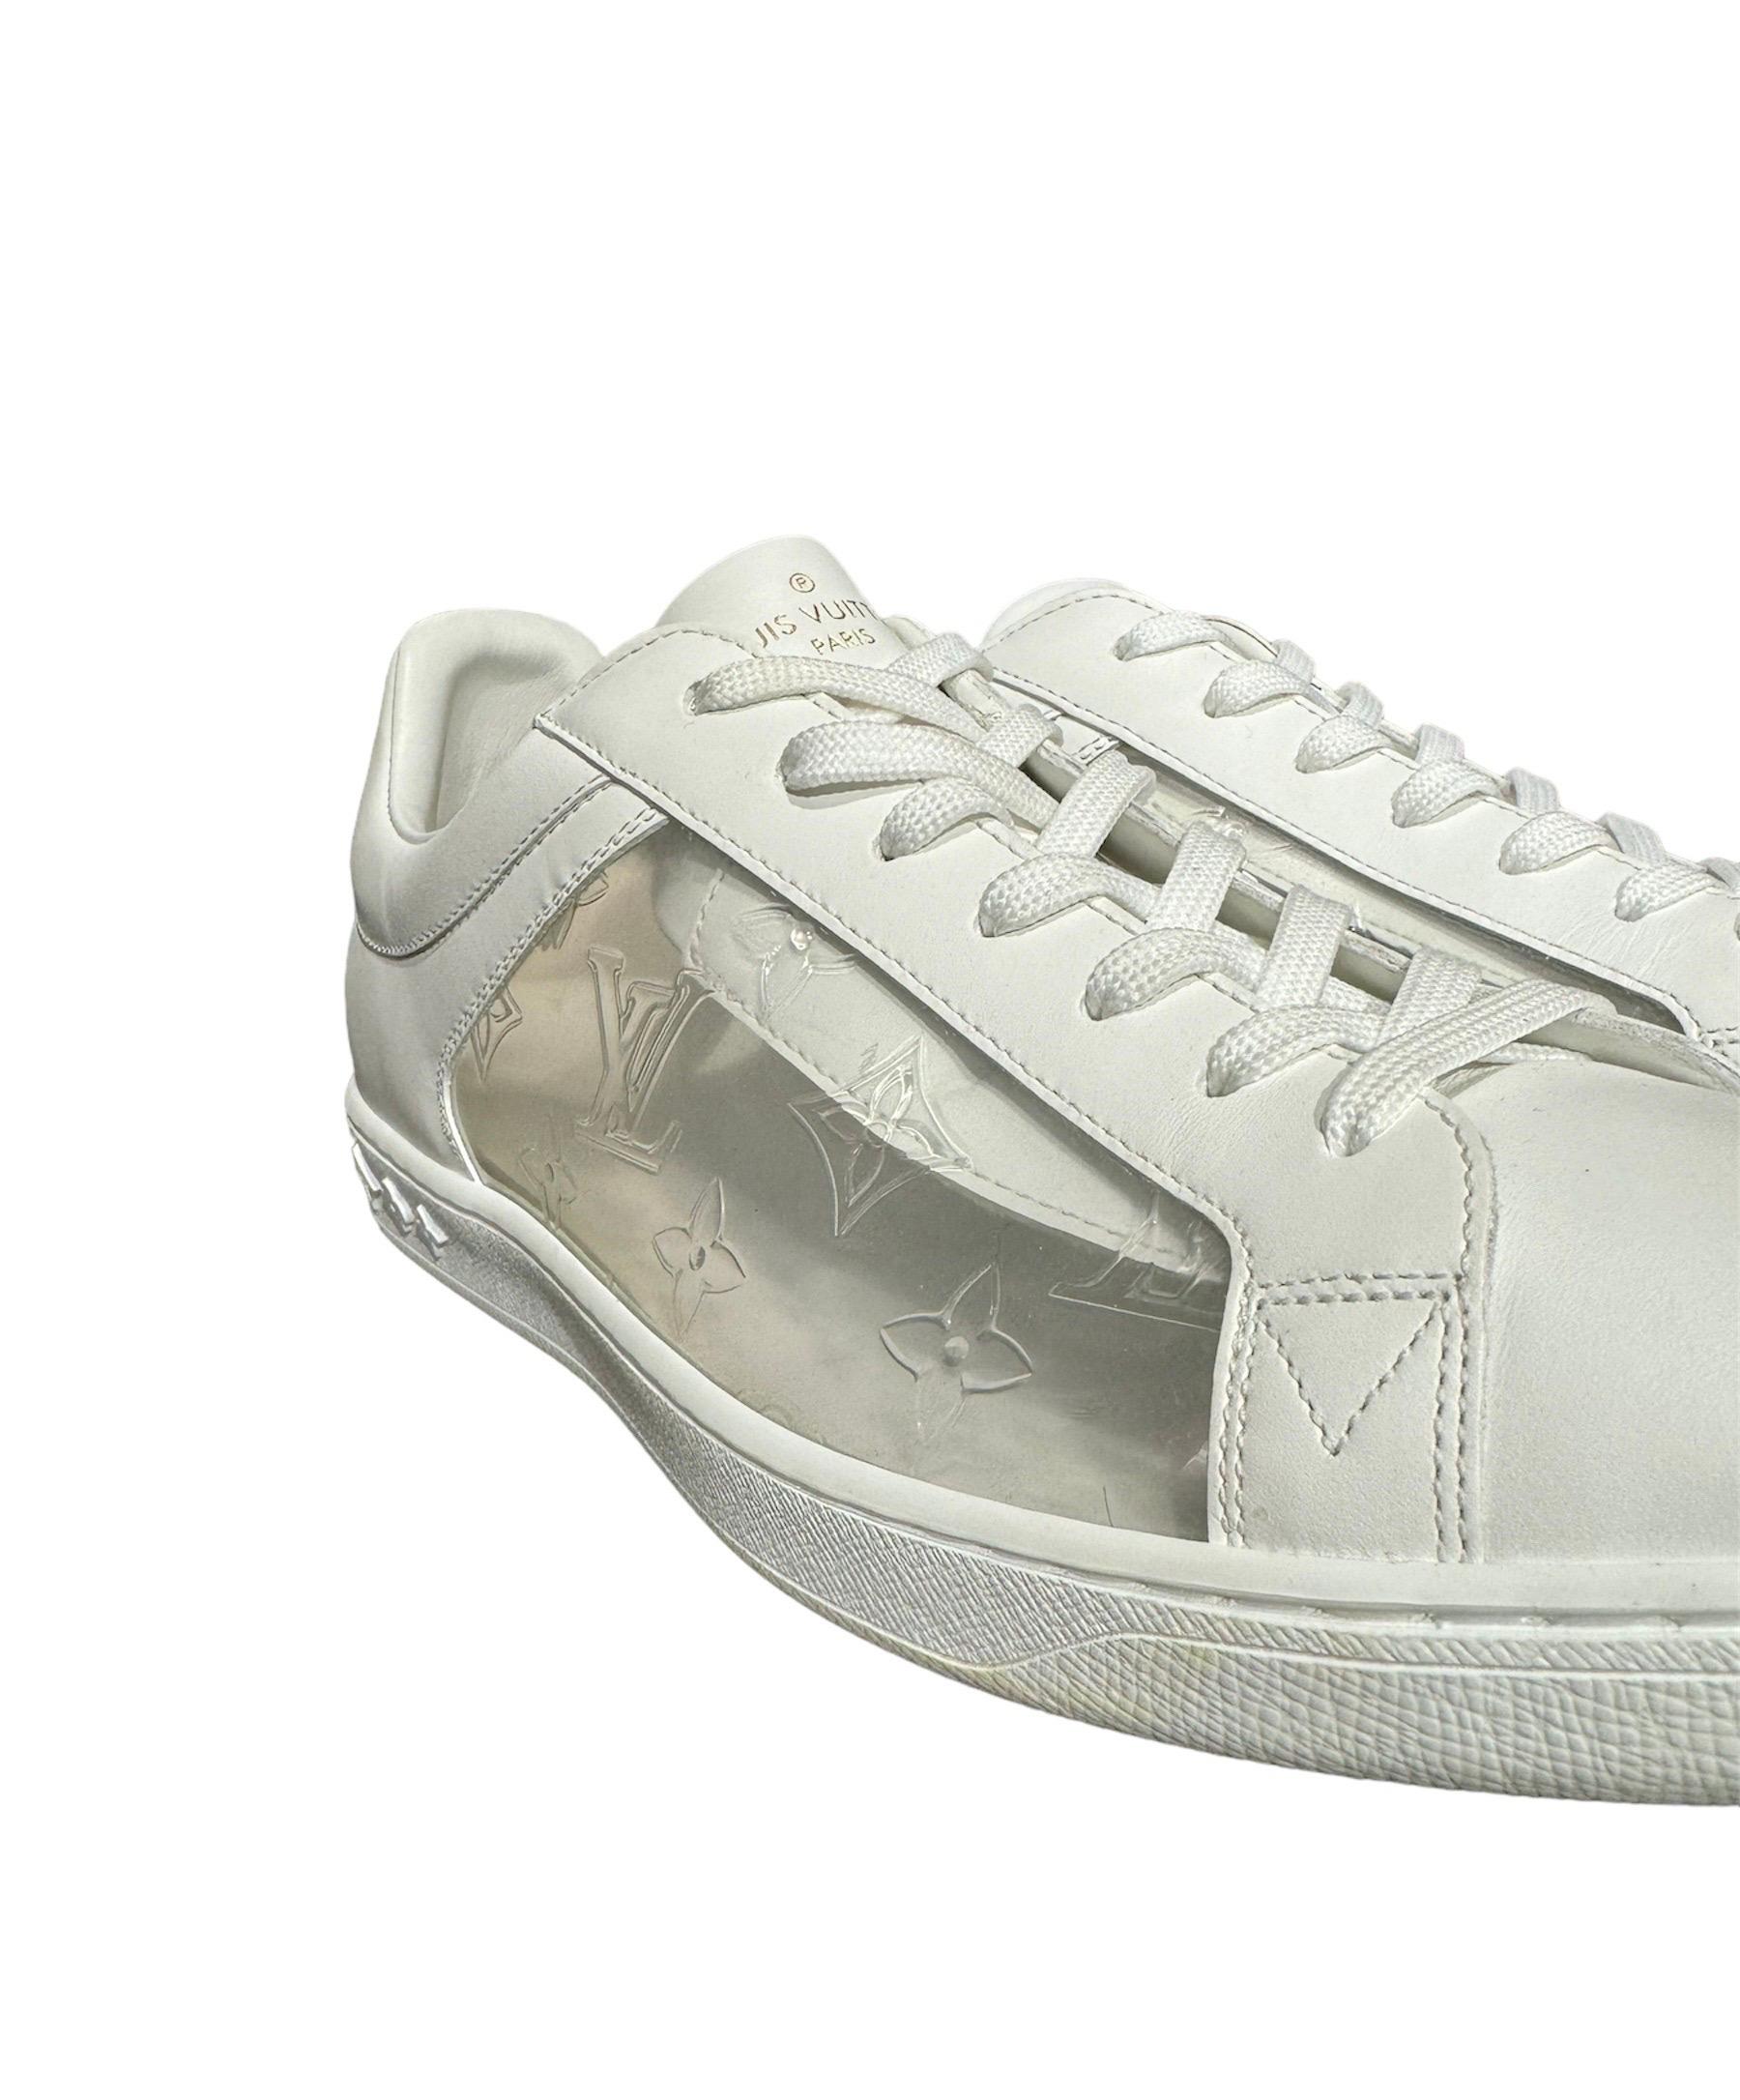 Louis Vuitton Sneakers Luxembourg In Excellent Condition For Sale In Torre Del Greco, IT